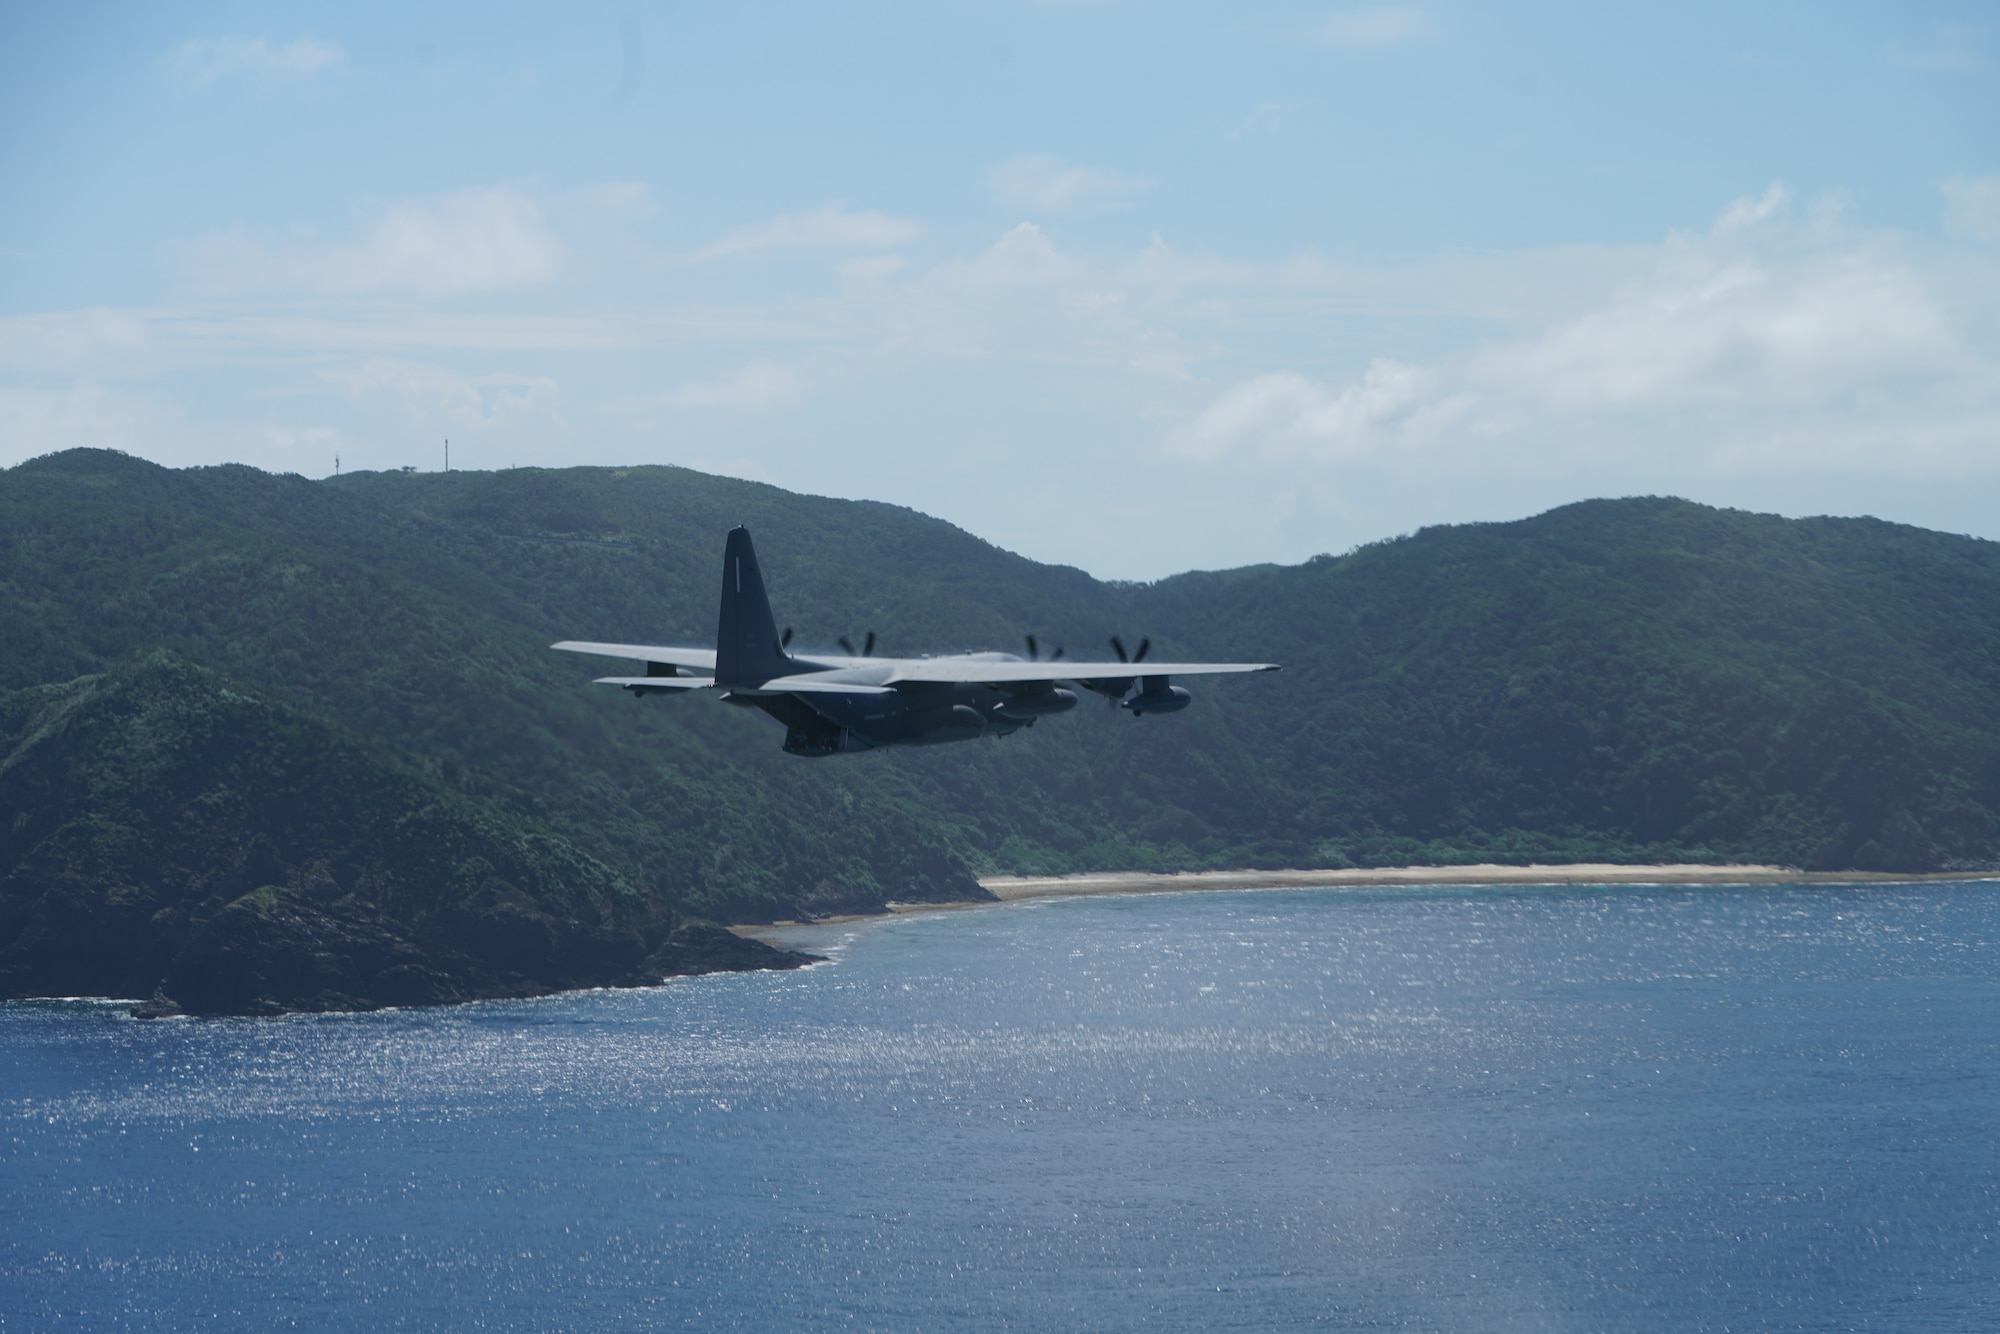 A U.S. Air Force C-130 assigned to the 353rd Special Operations Group flies over Okinawa, Japan 27 September, 2019.